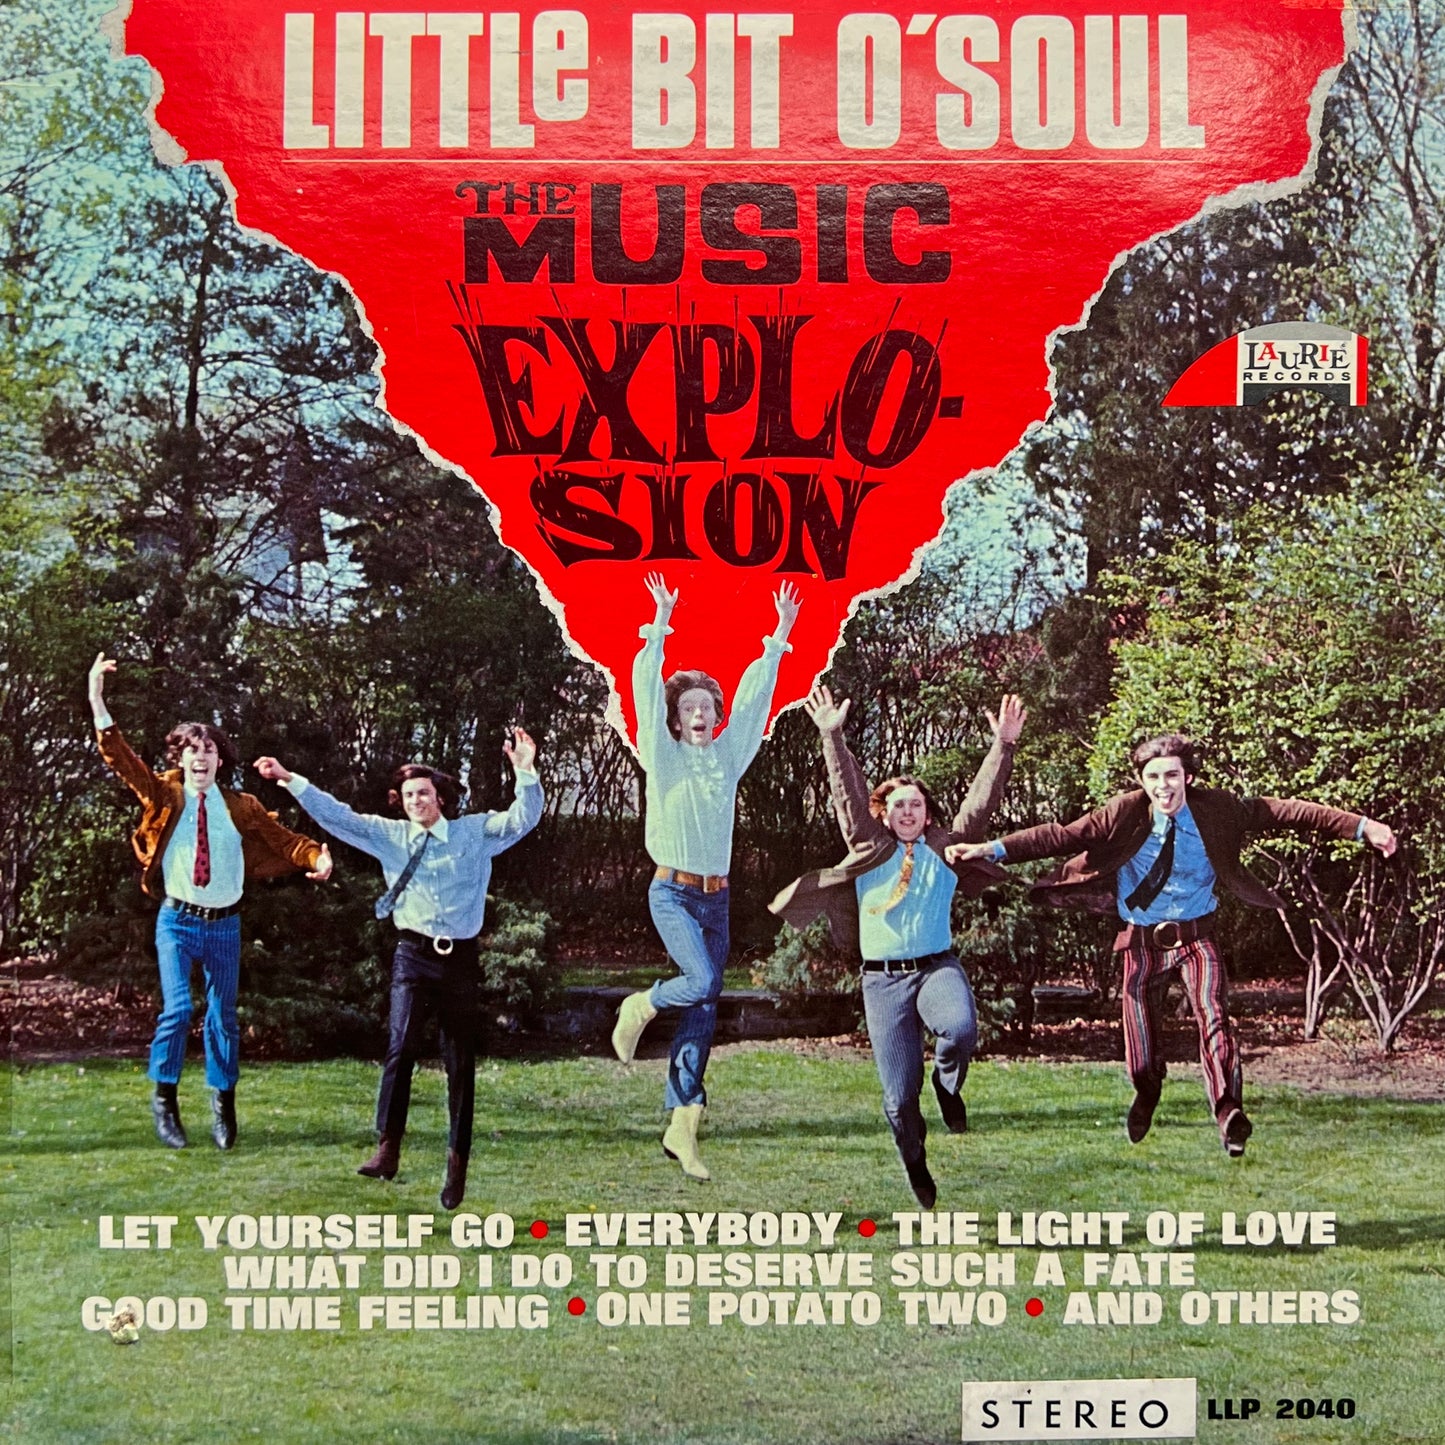 The Music Explosion — ‎Little Bit O' Soul [USED]